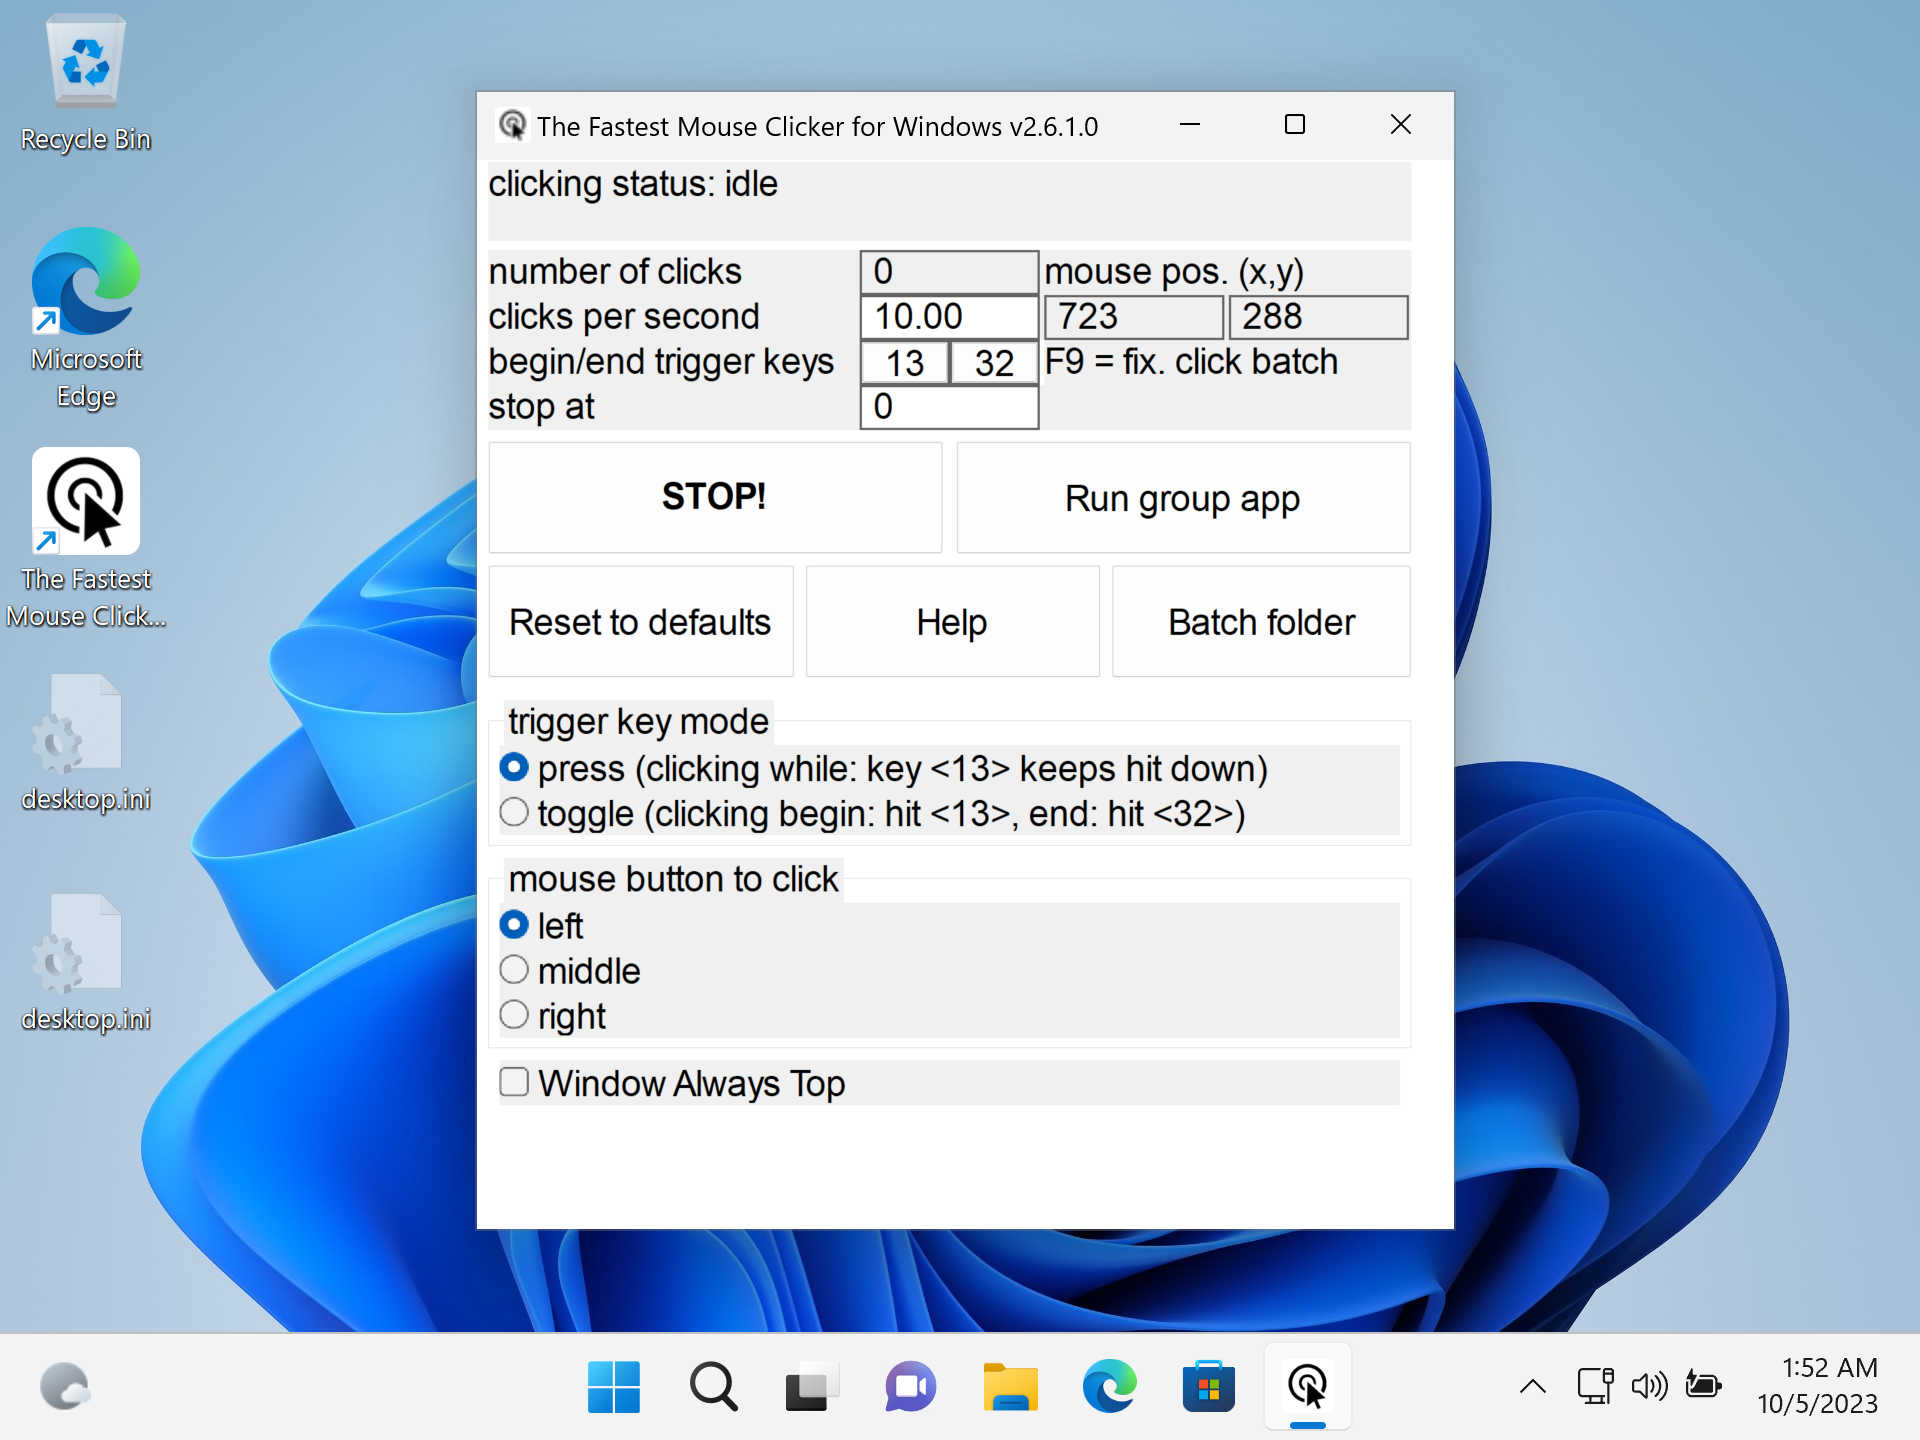 The Fastest Mouse Clicker for Windows version 2.6.1.0: "Single" application on Windows 11